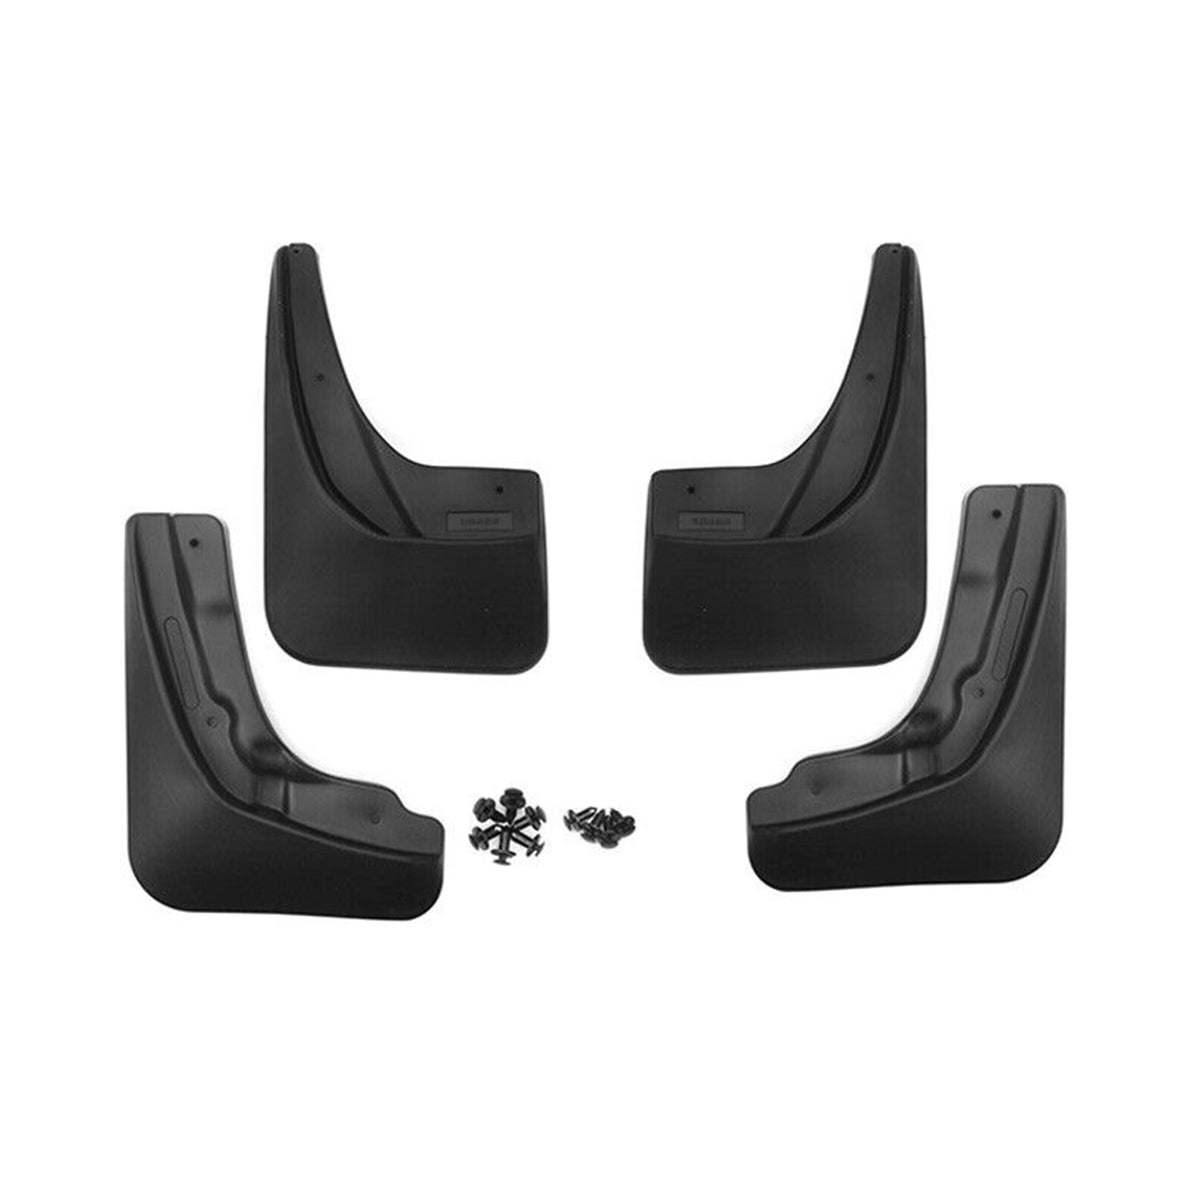 Mud flaps for Opel Zafira B 2005-2014 plastic 4 pieces